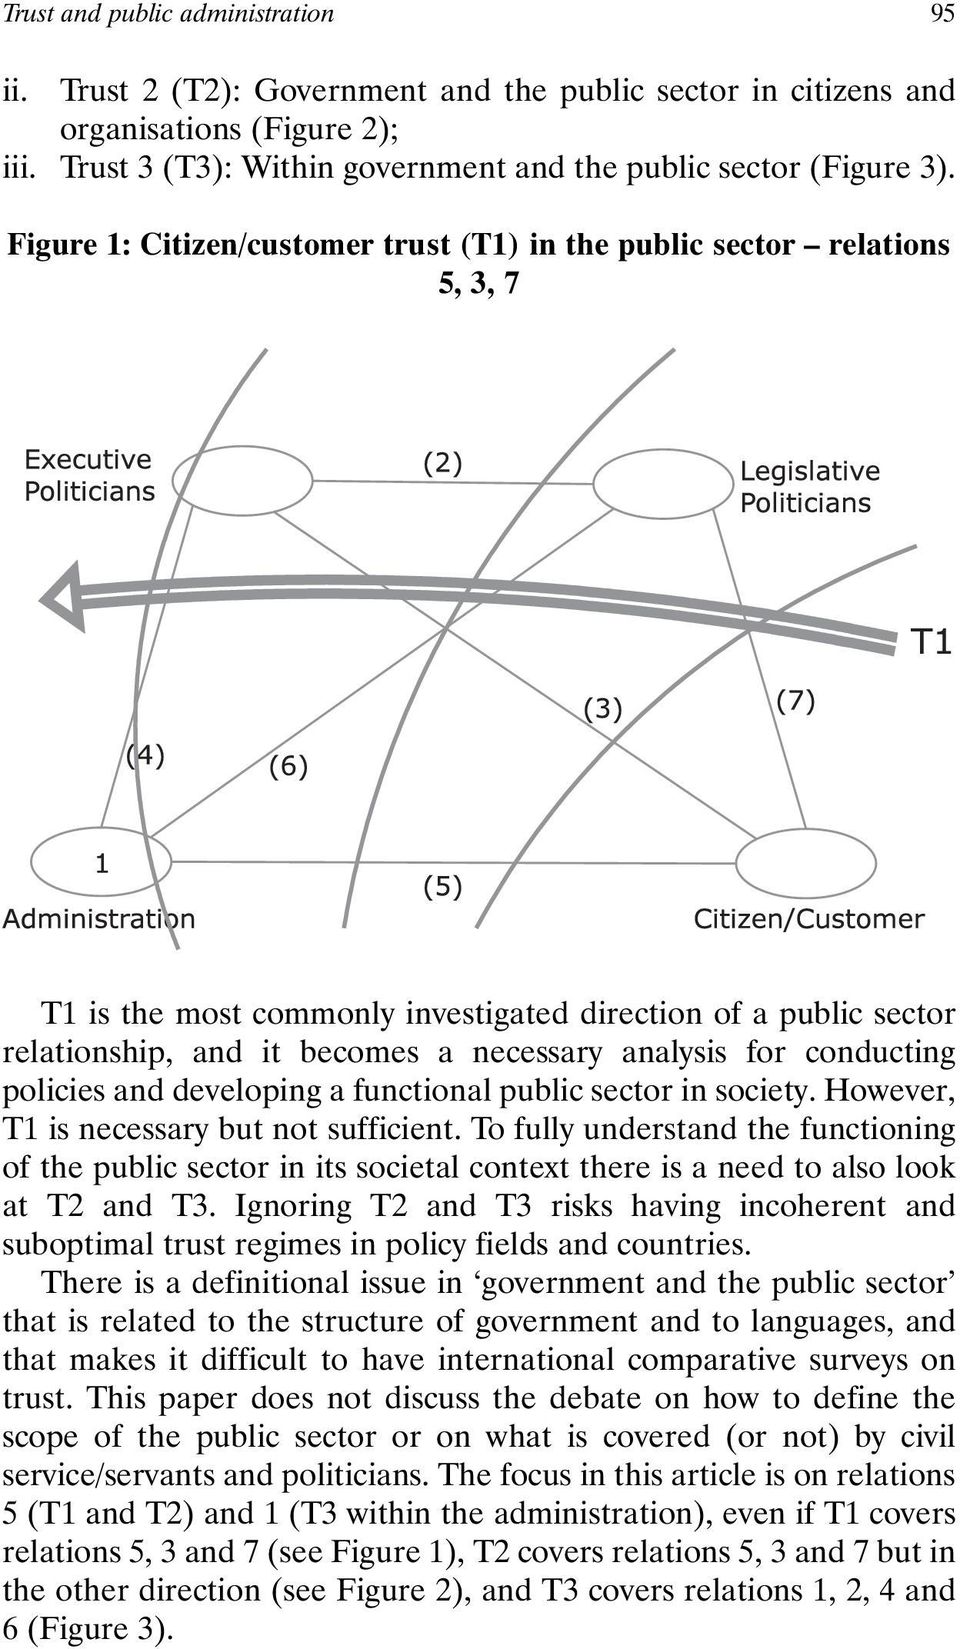 conducting policies and developing a functional public sector in society. However, T1 is necessary but not sufficient.